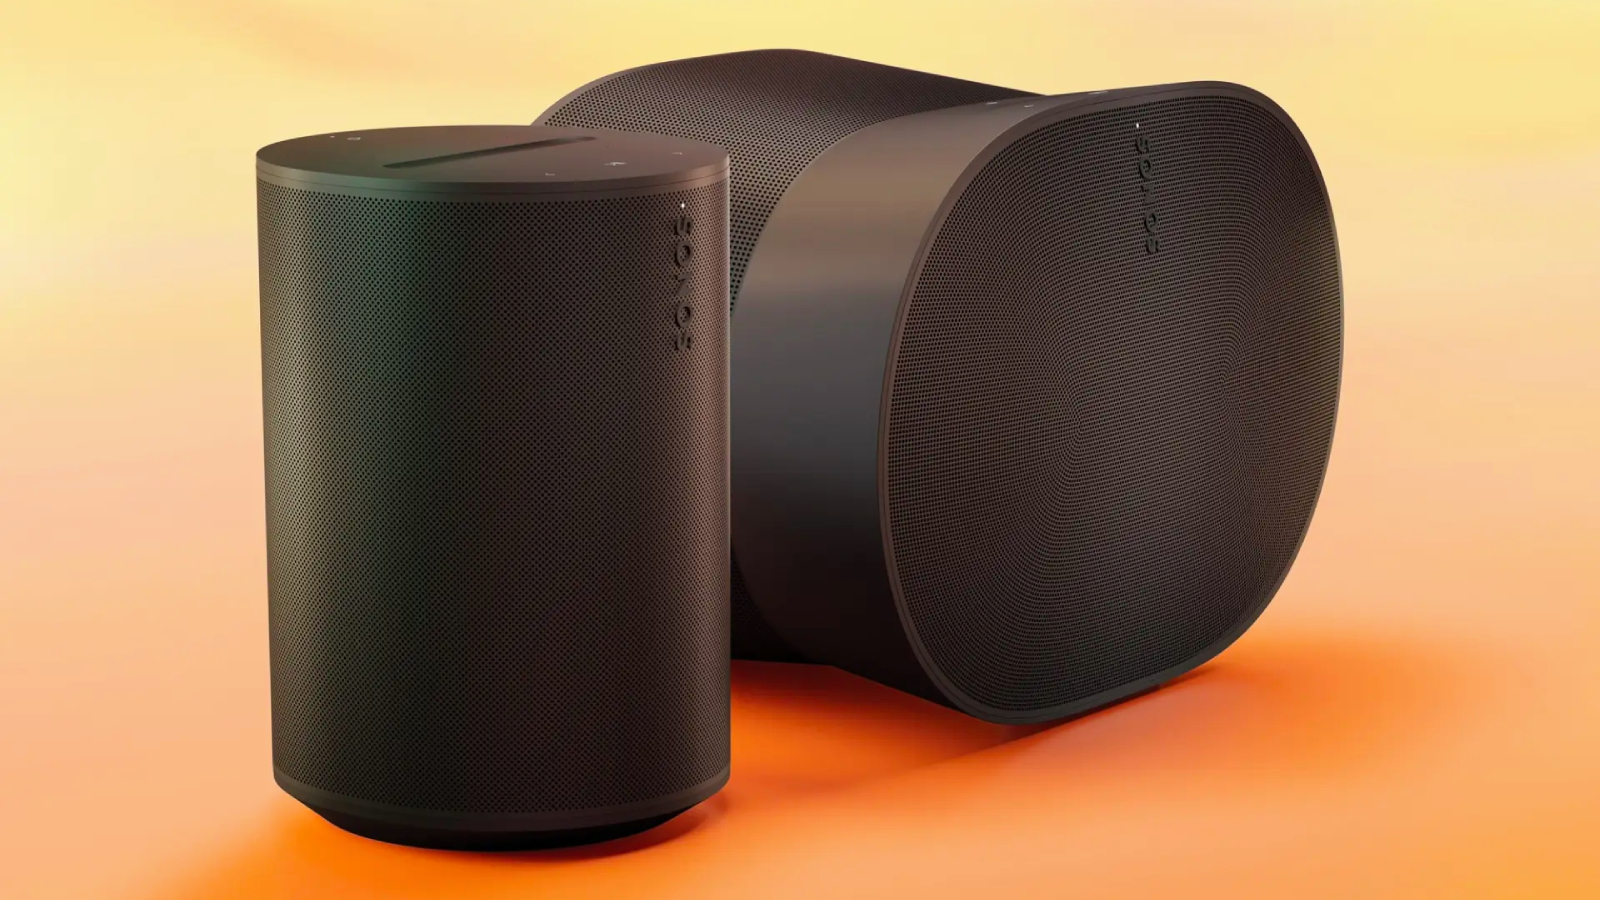 Sonos Era 300 review: too ahead of its time - The Verge